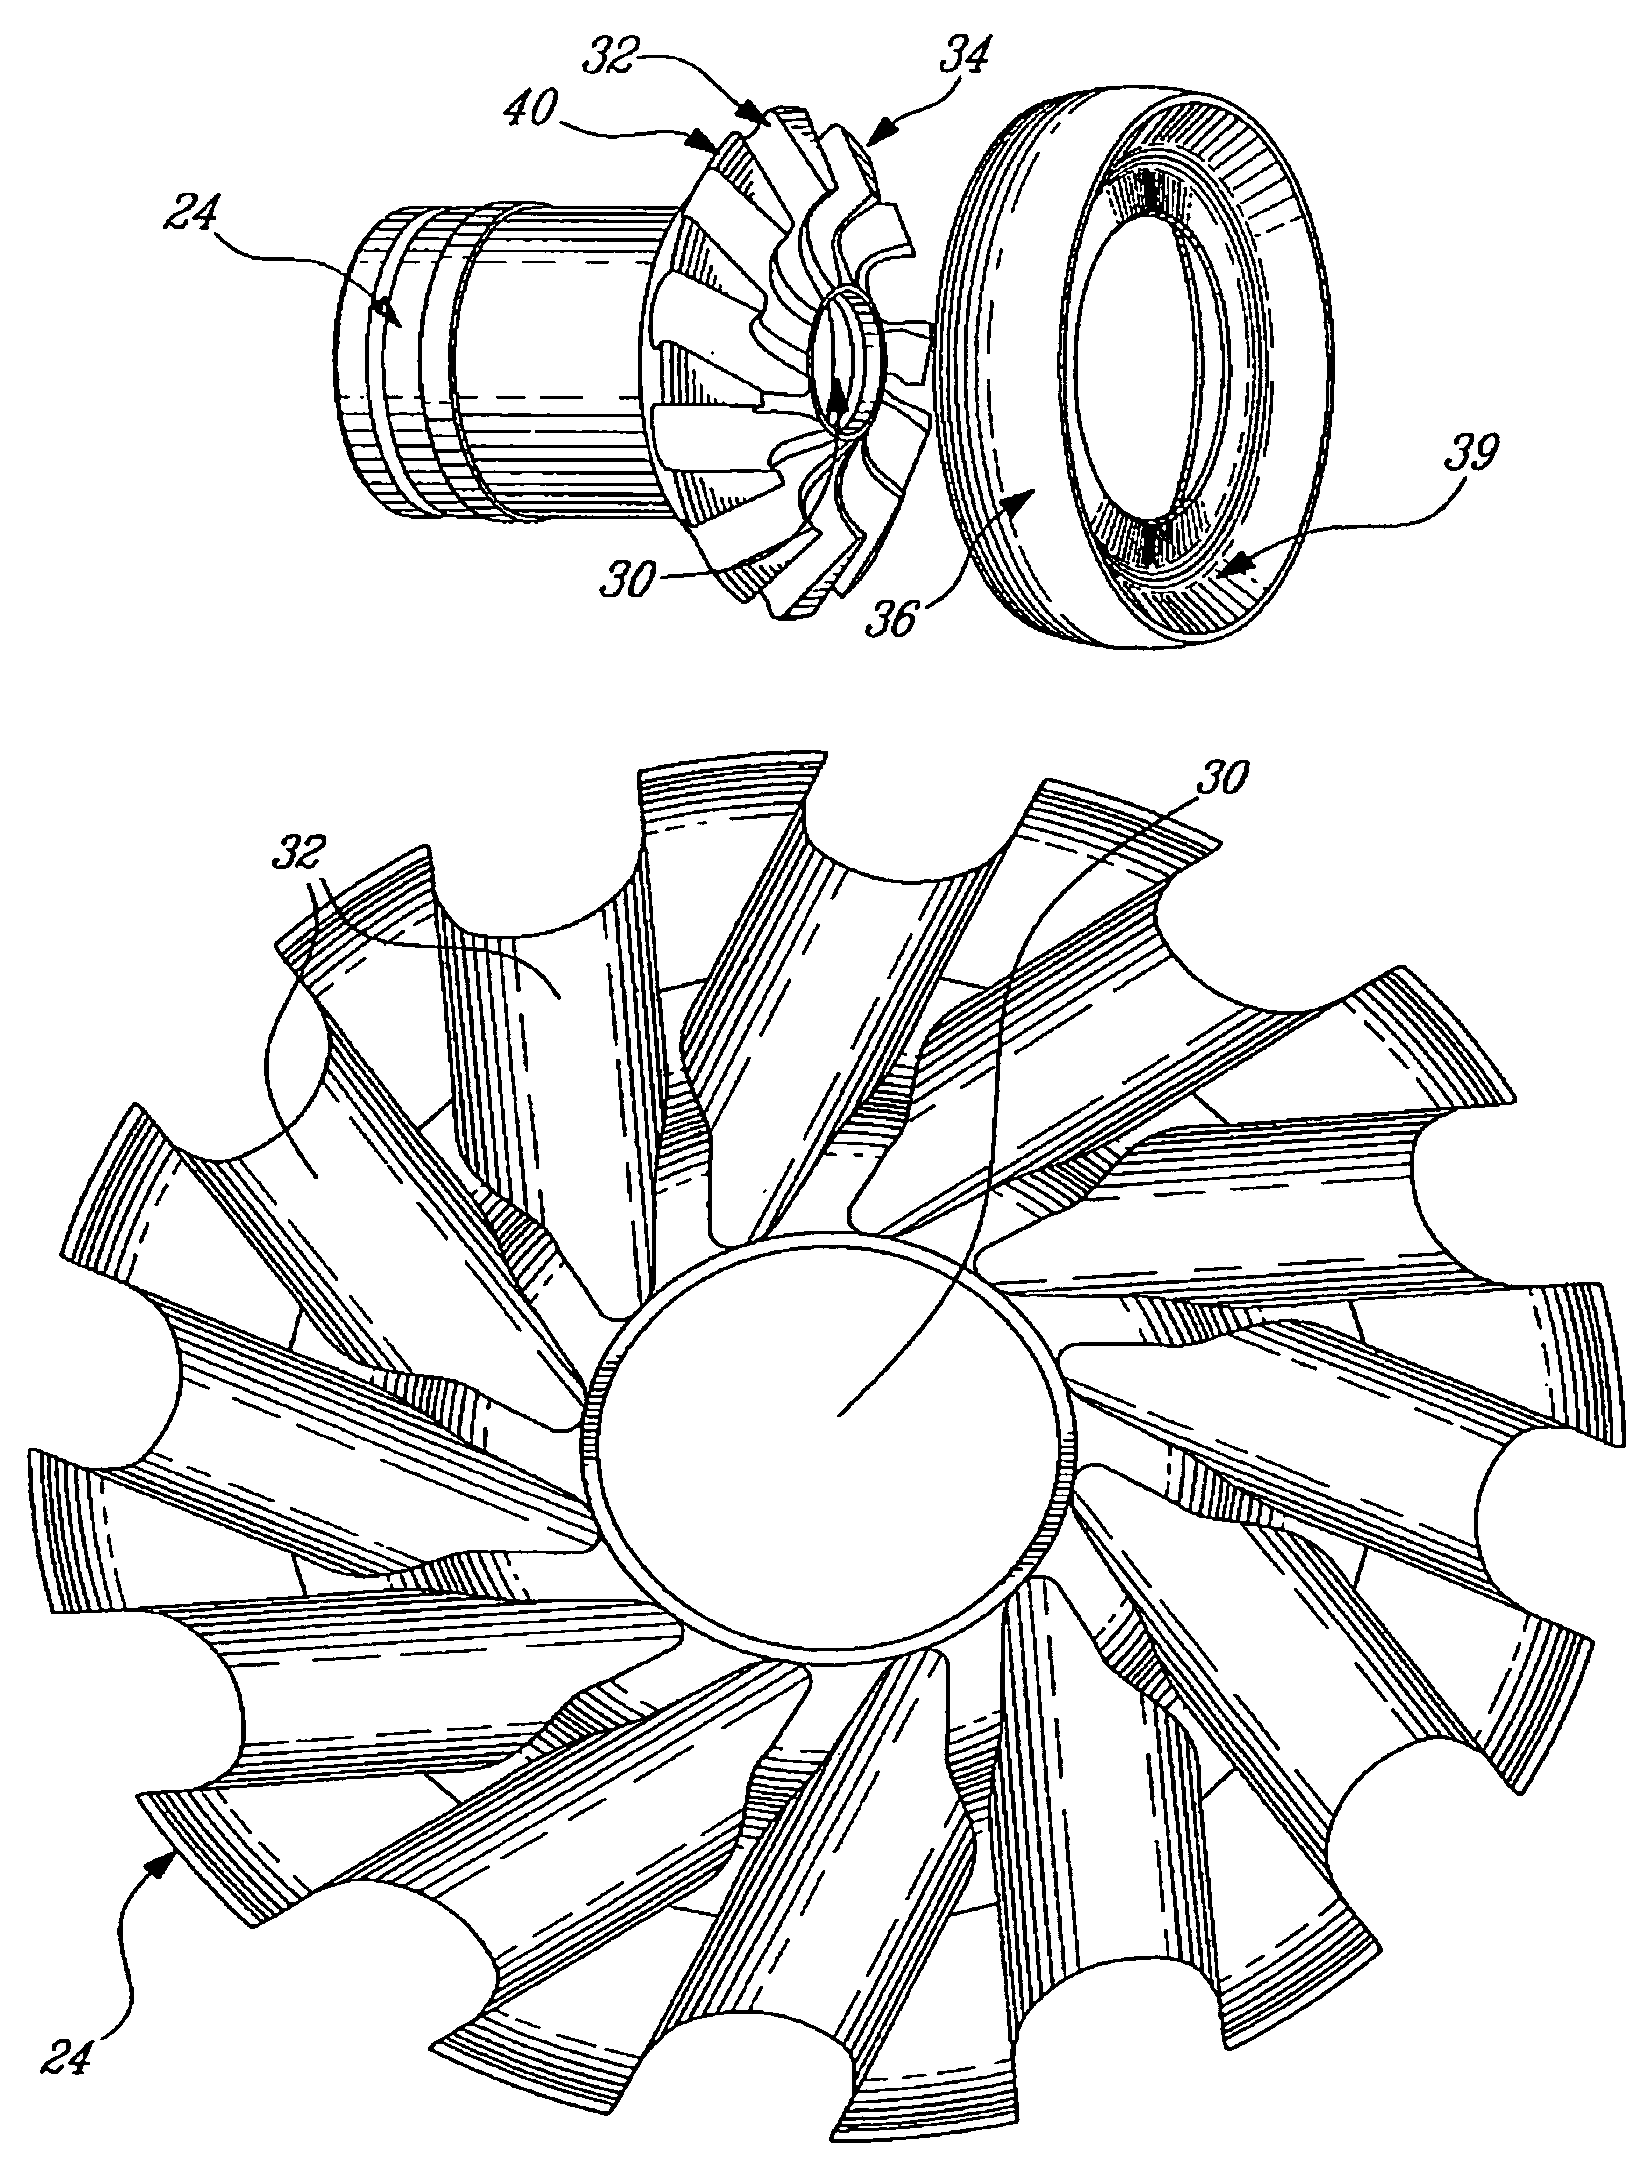 Modular fuel nozzle and method of making